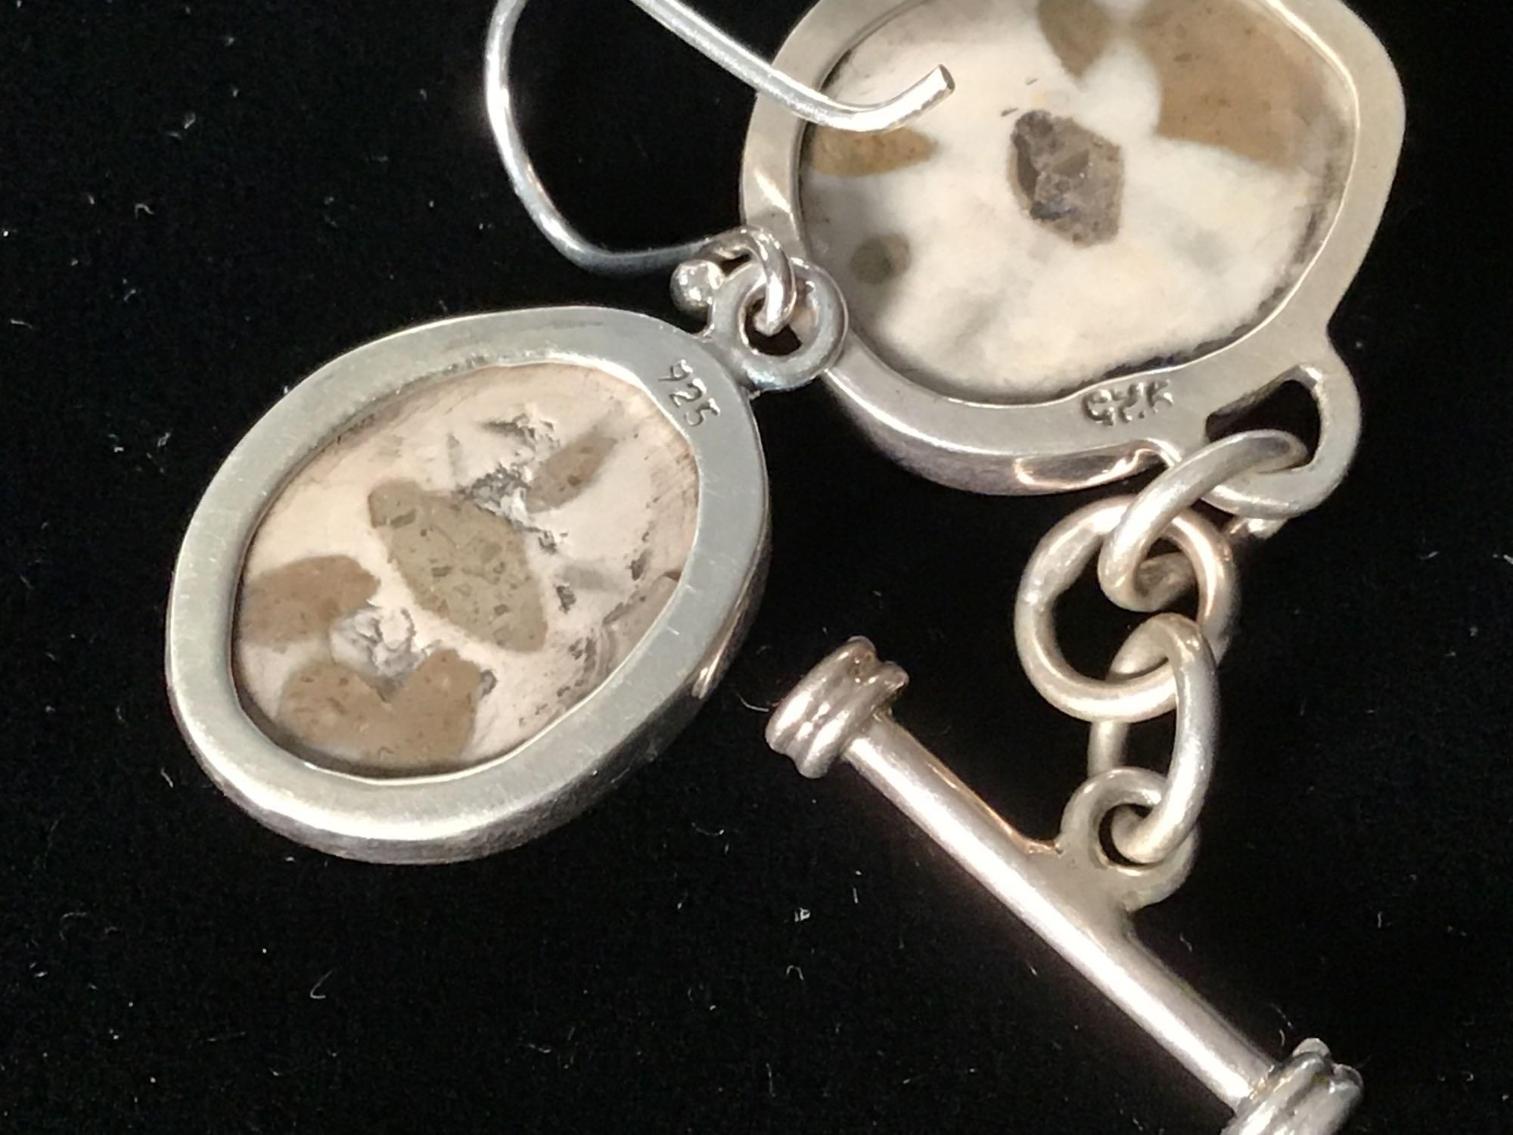 Image for Sand Dollar Bracelet and Earrings in Sterling Silver